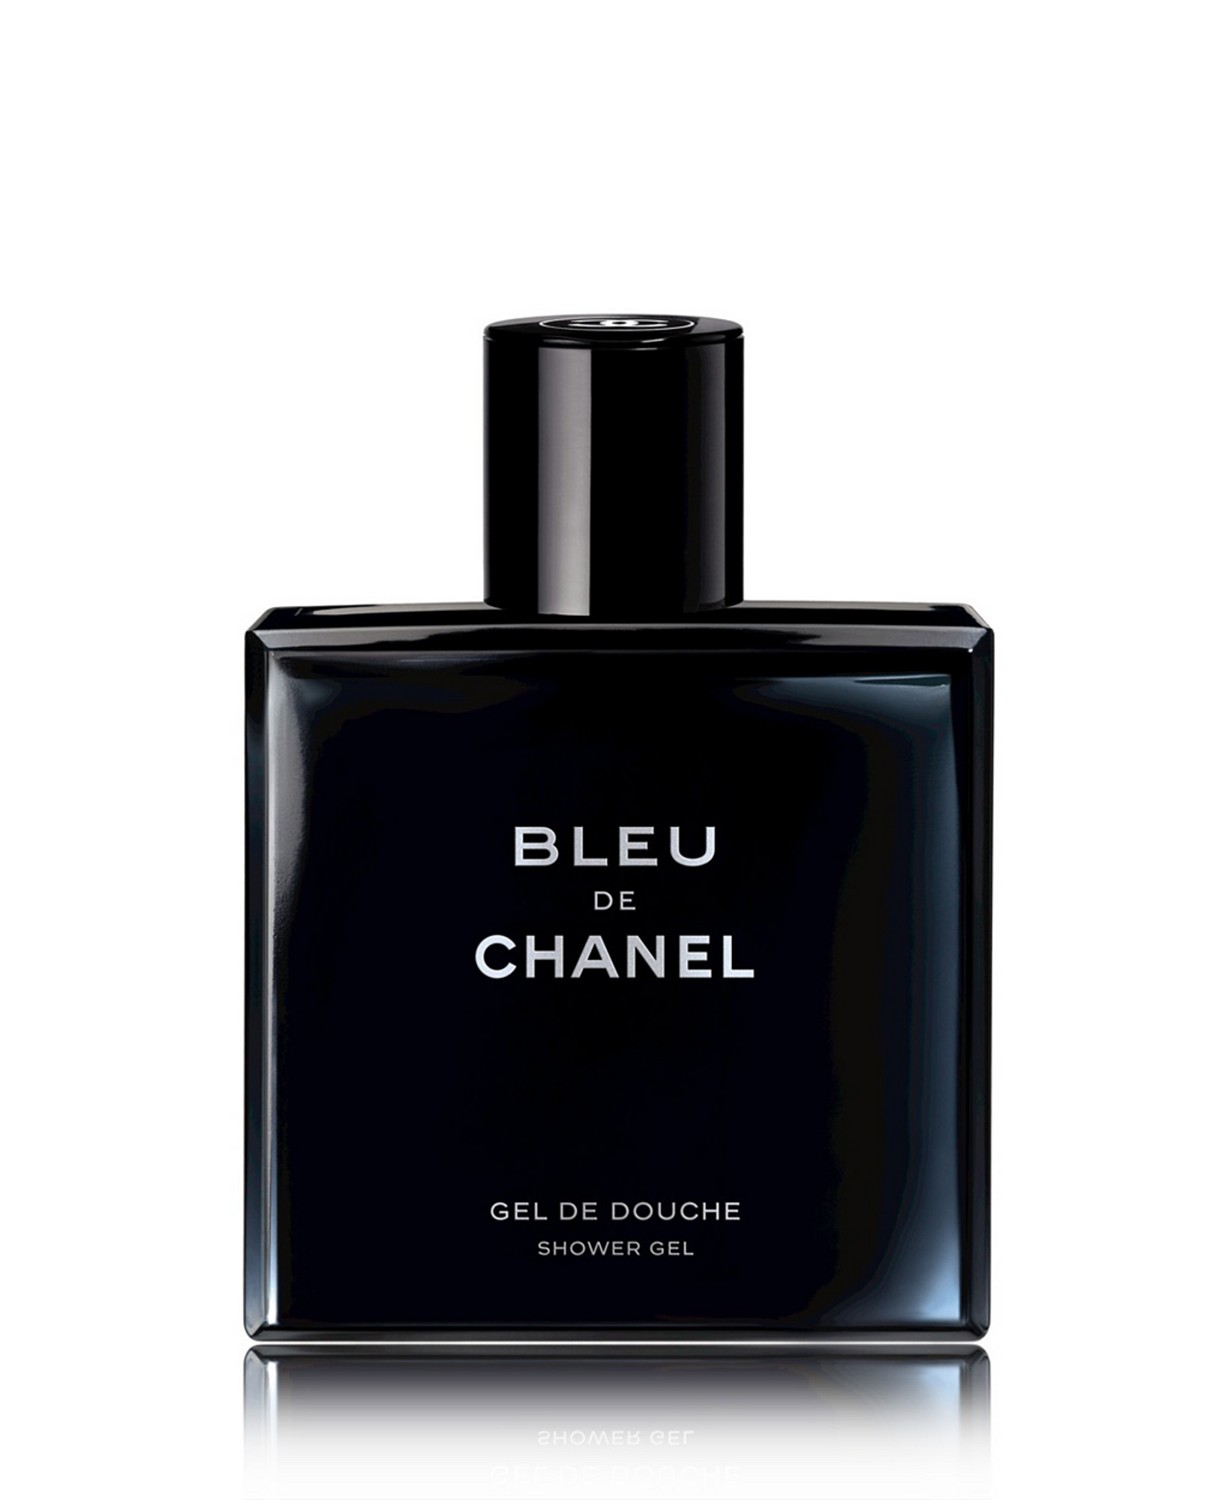 7 Fragrances Men Need To STOP Using 